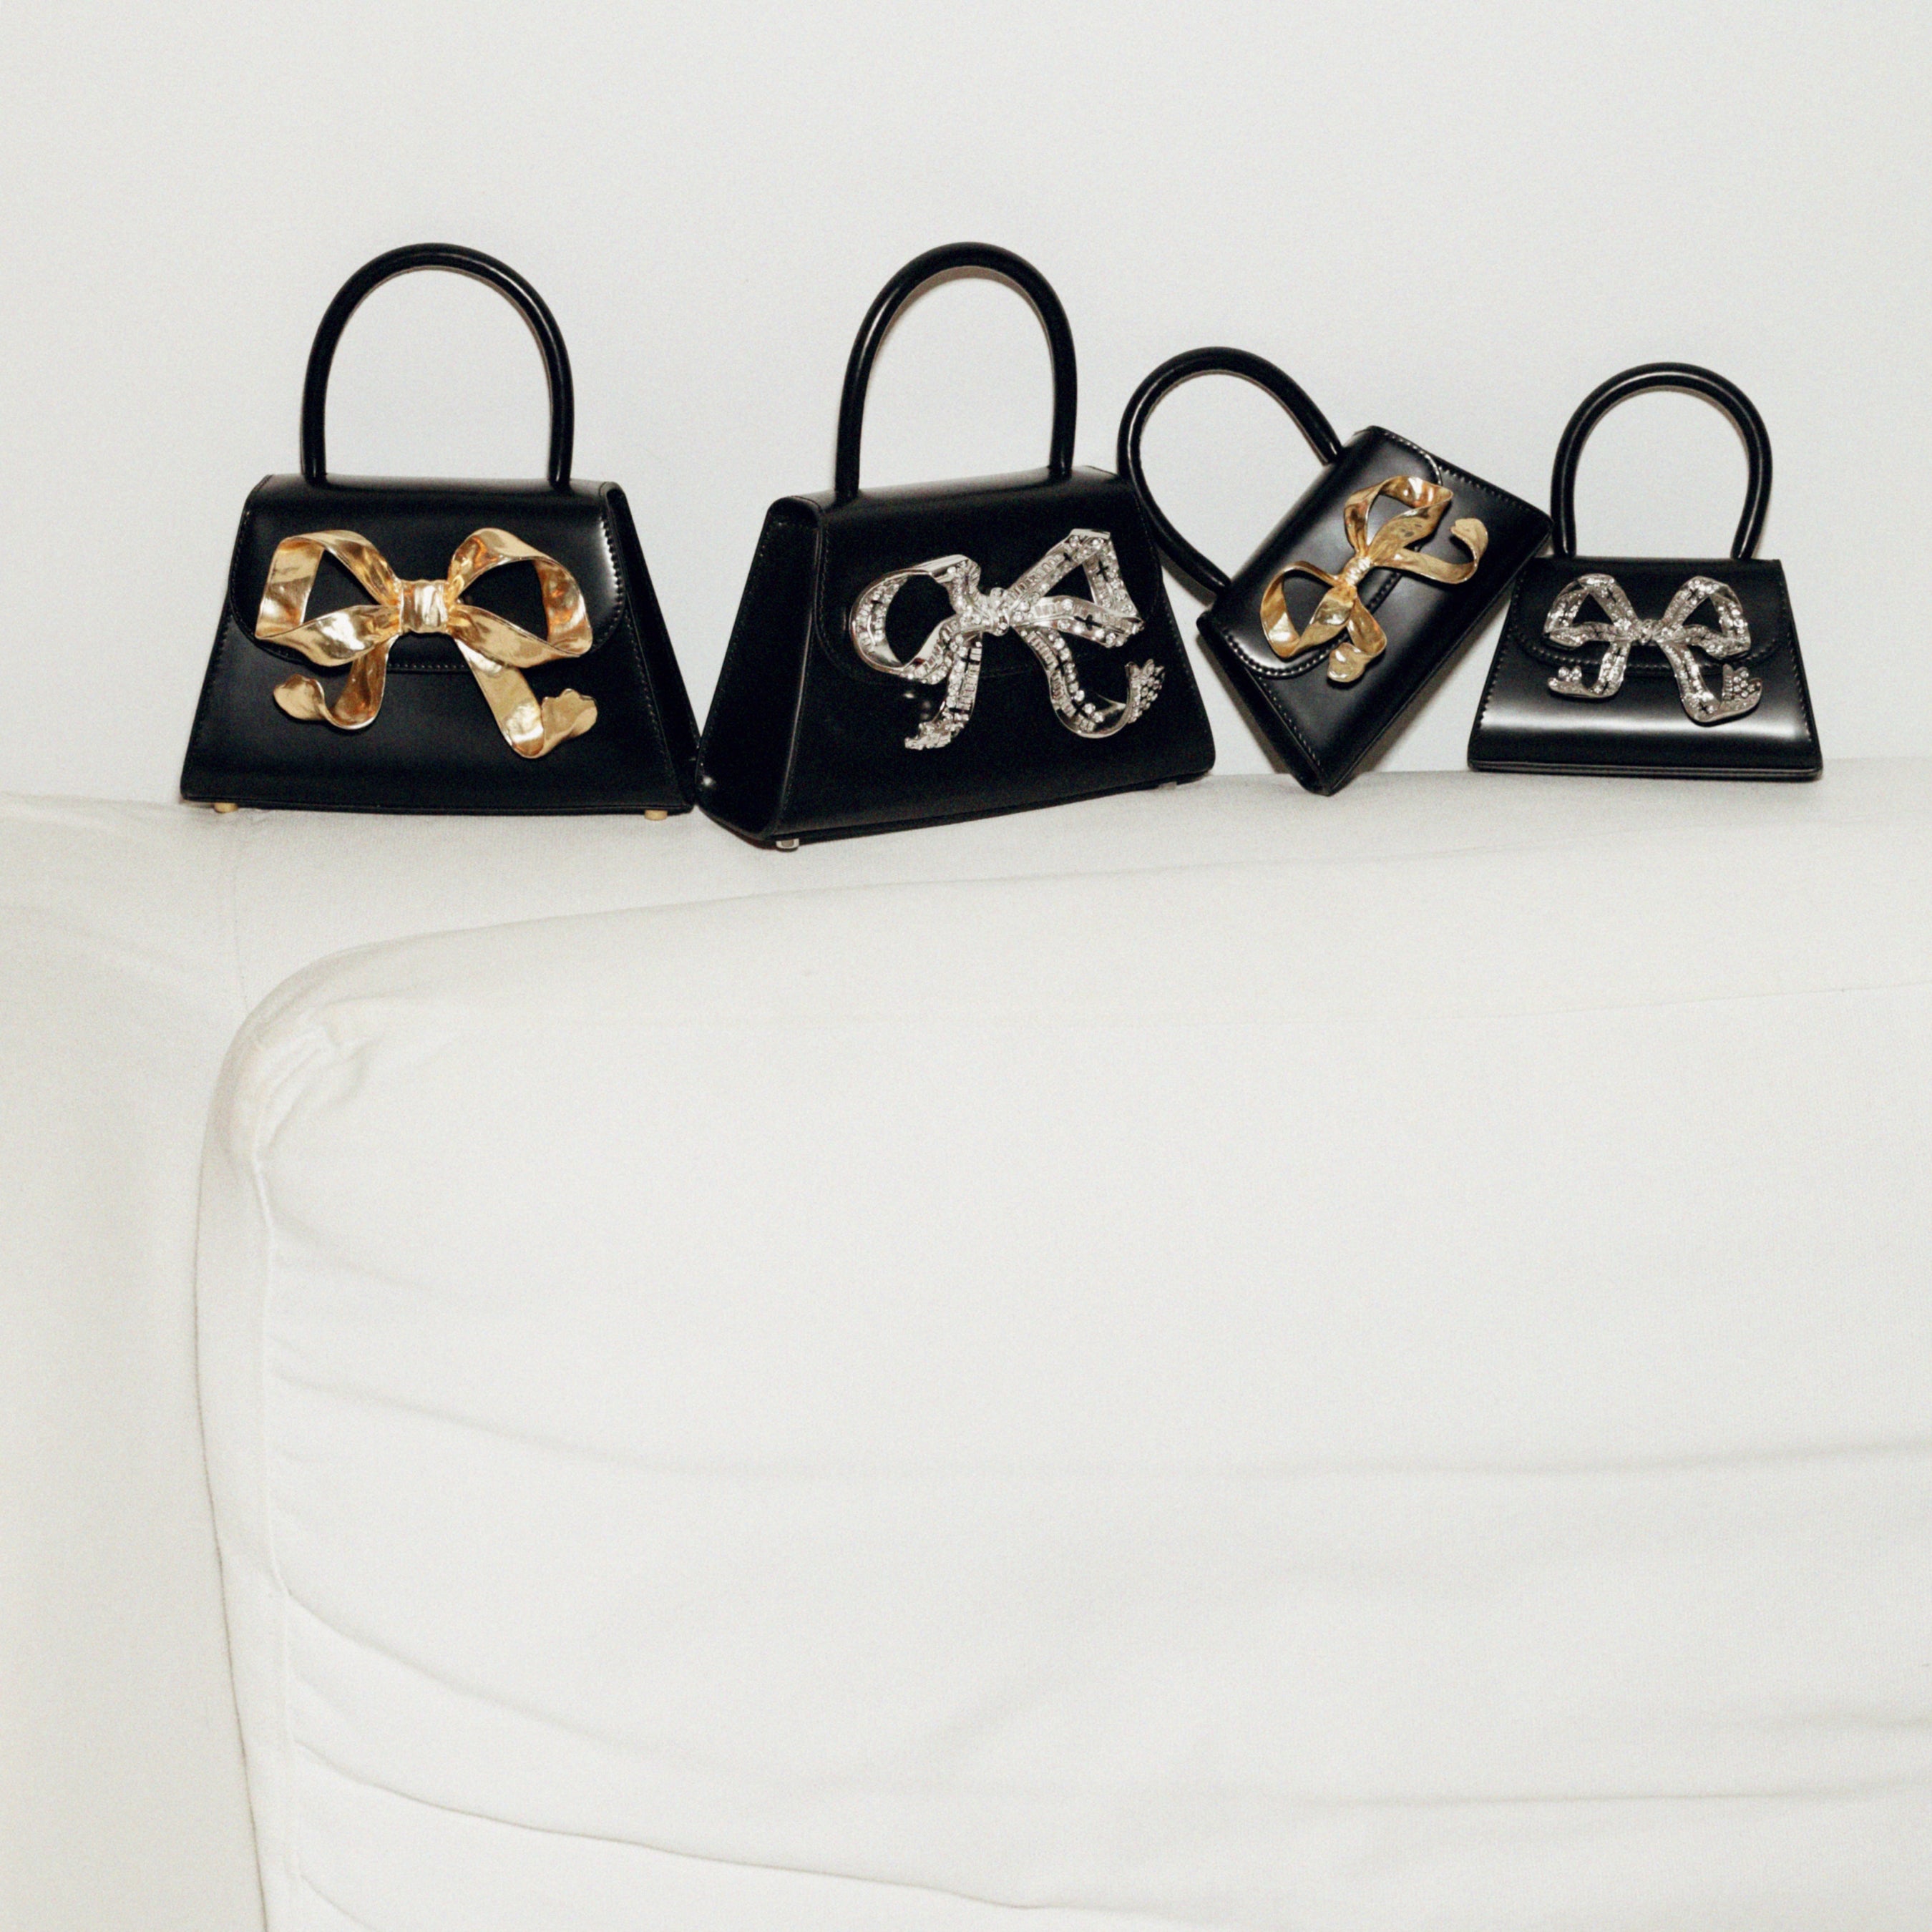 The Bow Mini in Black with Gold Hardware